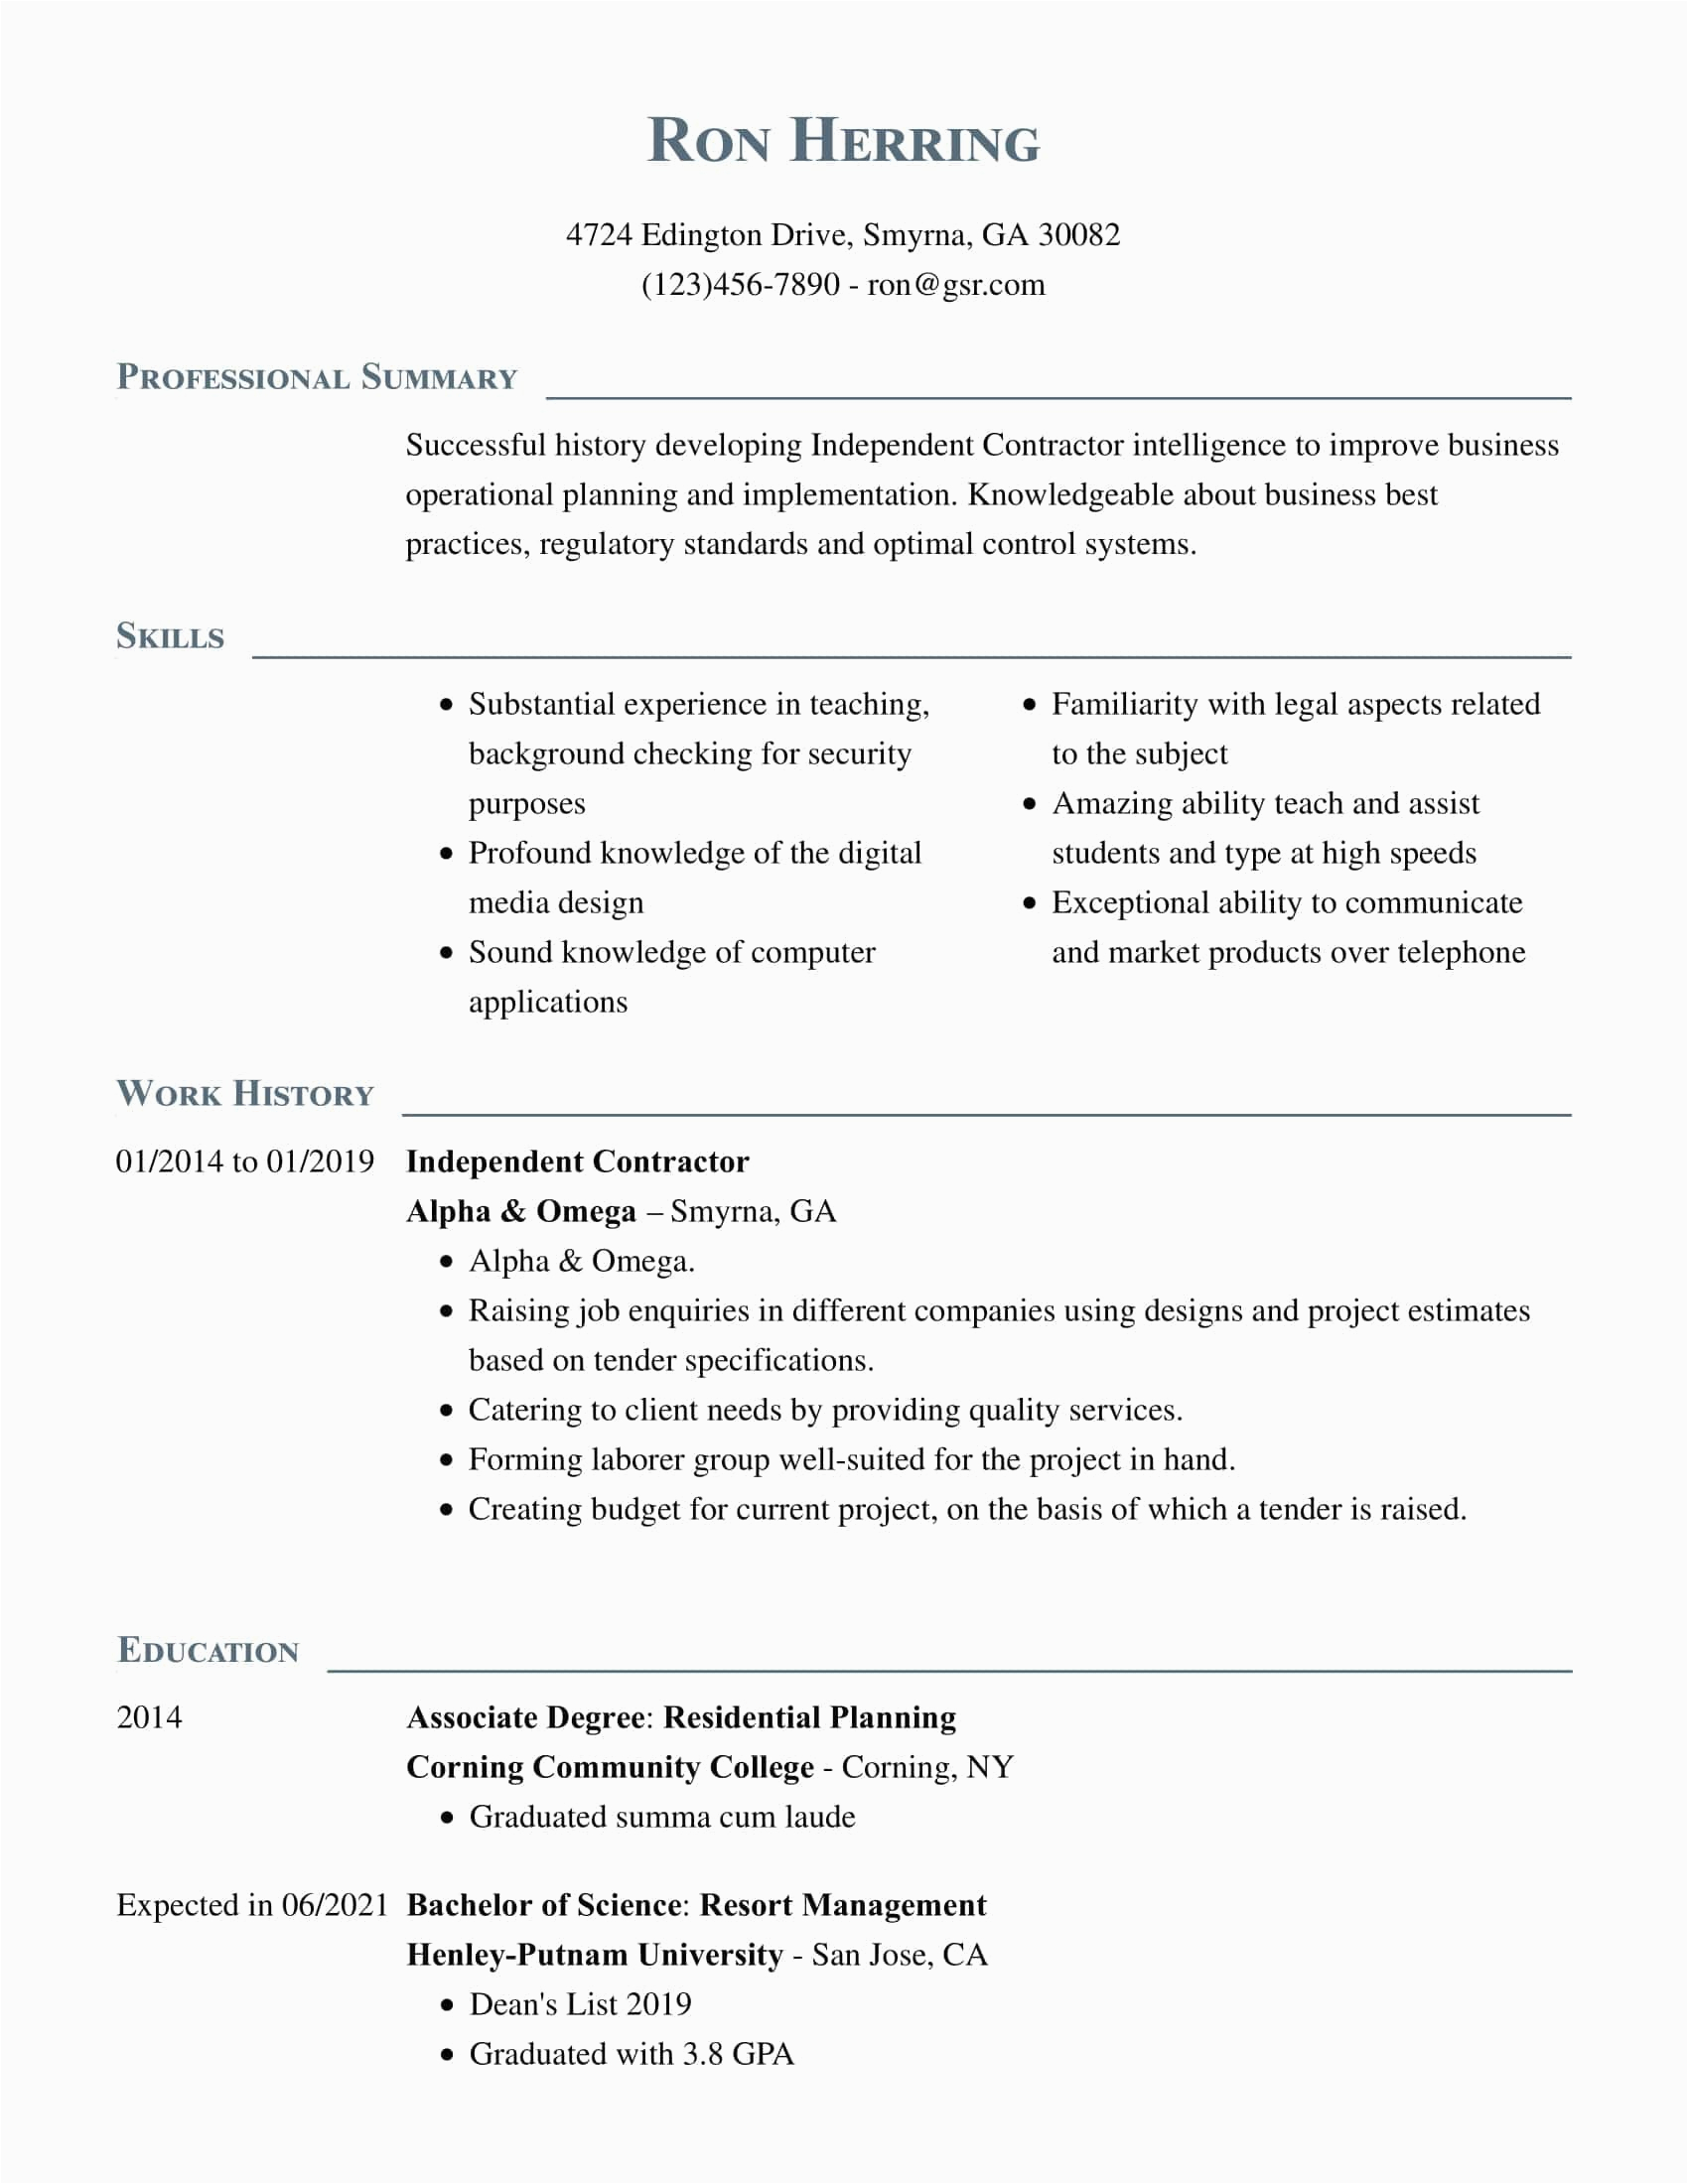 Resume Sample for Multiple Positions In the Same Company Professional Sample Resume Multiple Positions Same Pany